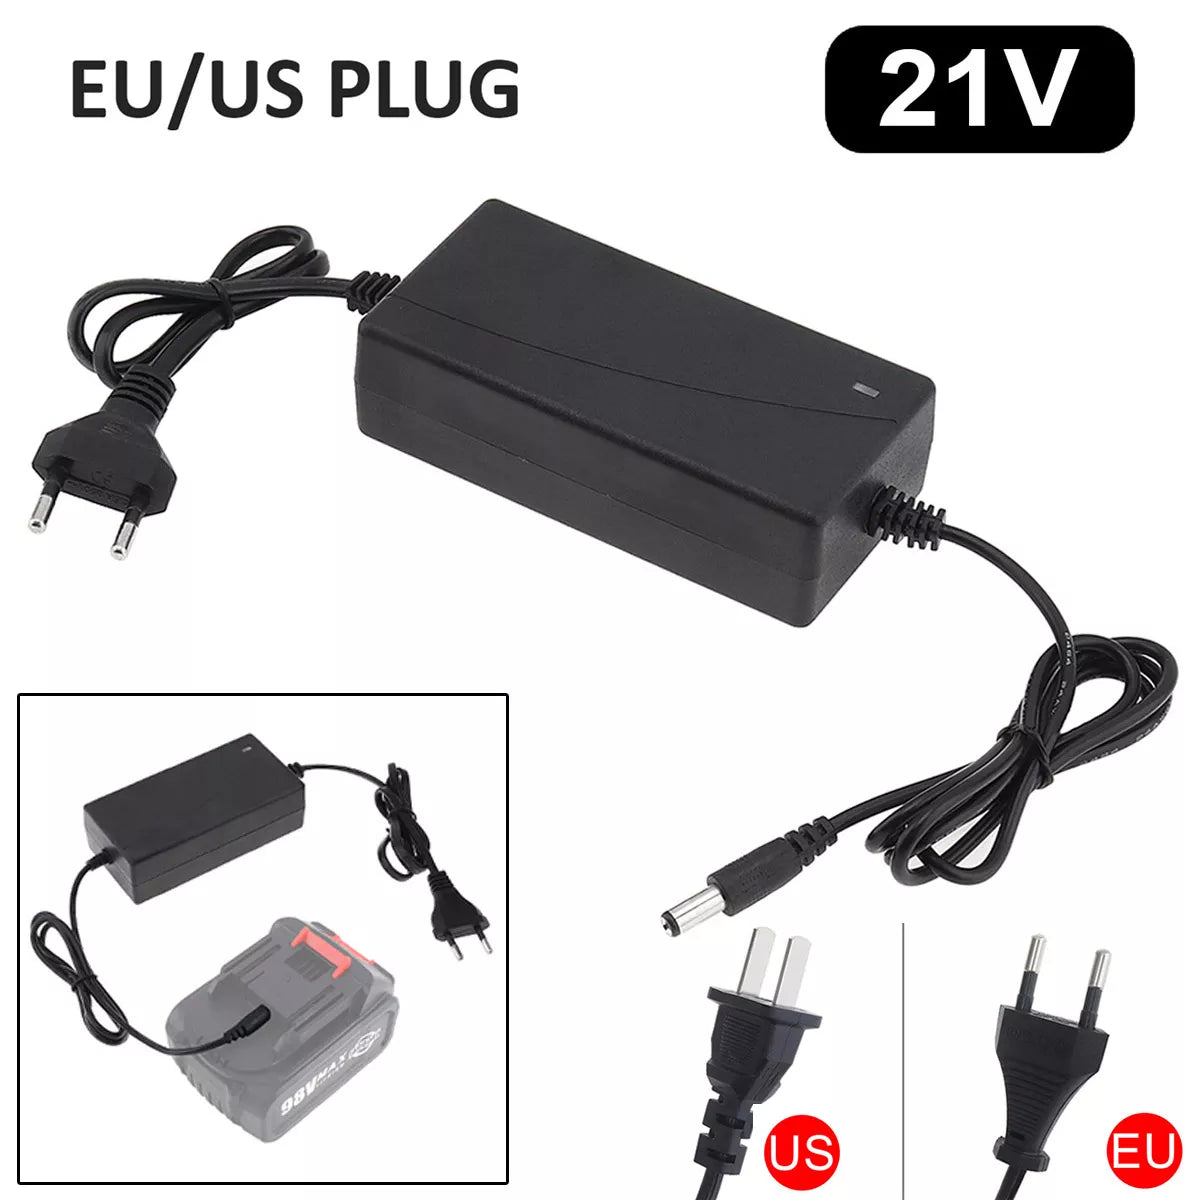 18650 Lithium Battery Charger for 18V 21V Electric Screwdriver Wrench Cordless Drill Saw Battery Pack Power Tool Accessories